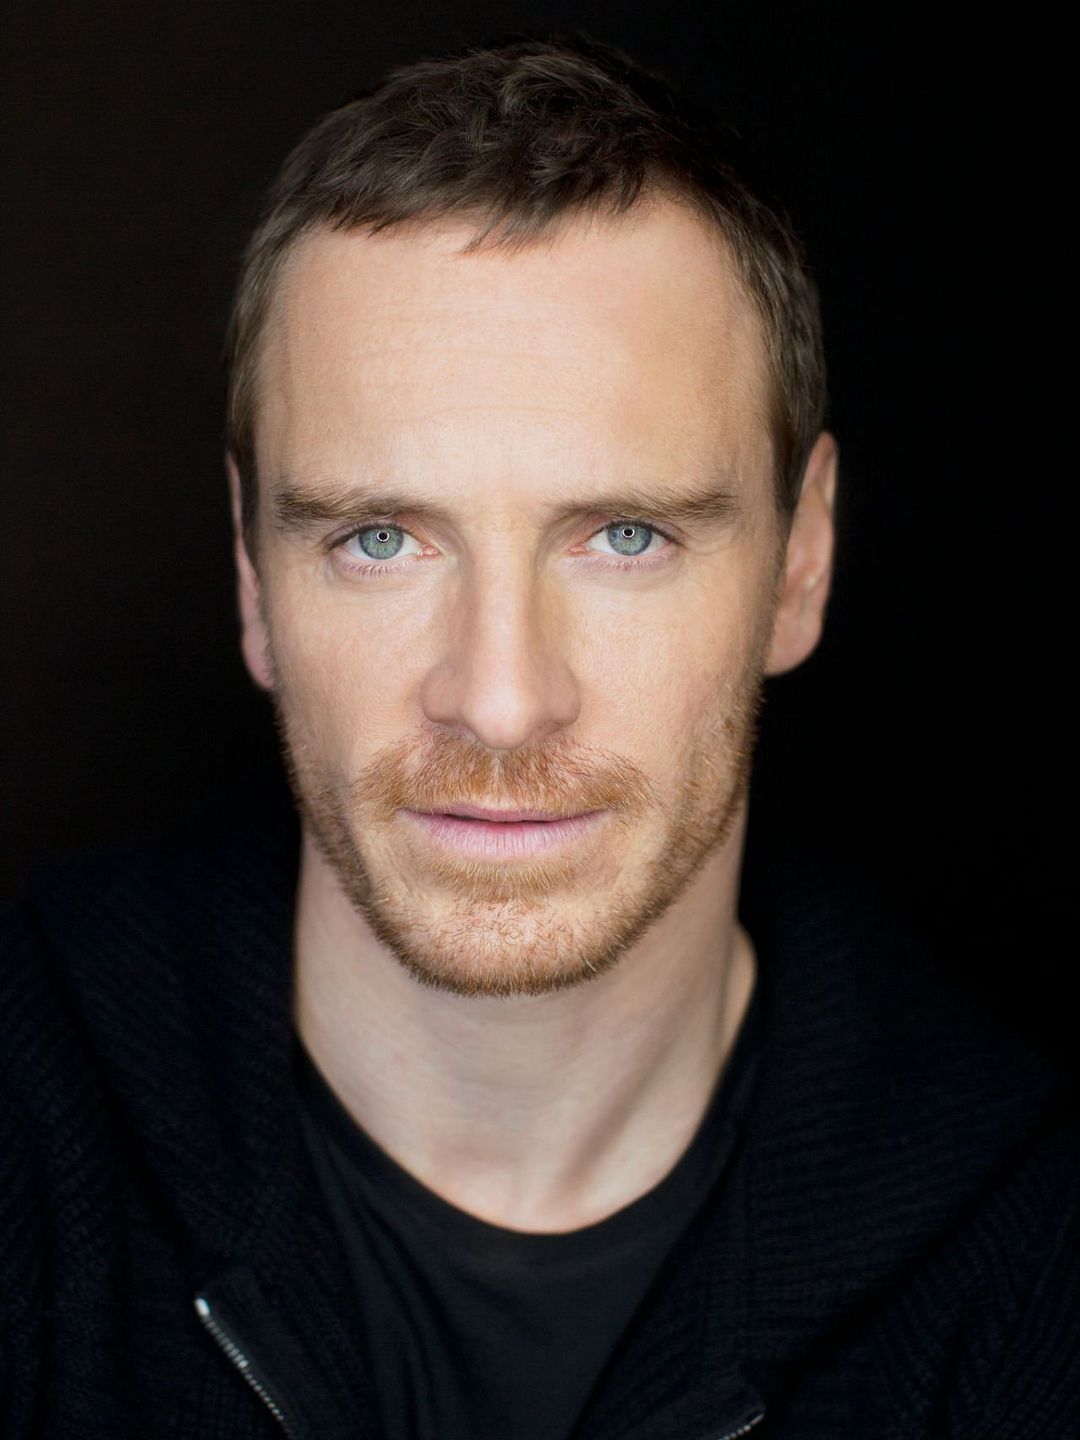 Michael Fassbender young pics